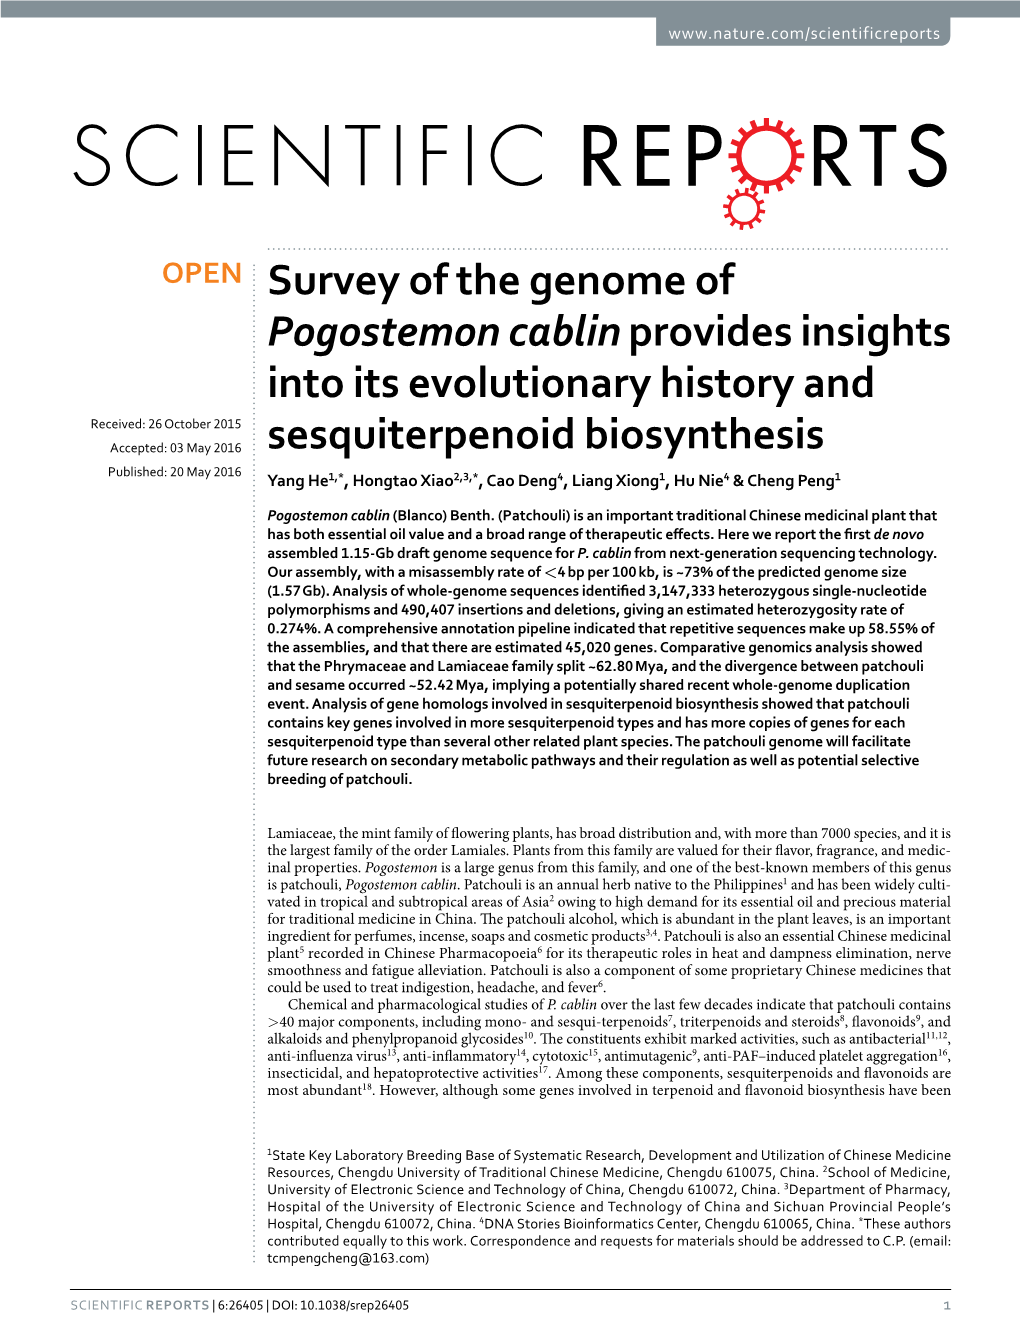 Survey of the Genome of Pogostemon Cablin Provides Insights Into Its Evolutionary History and Sesquiterpenoid Biosynthesis